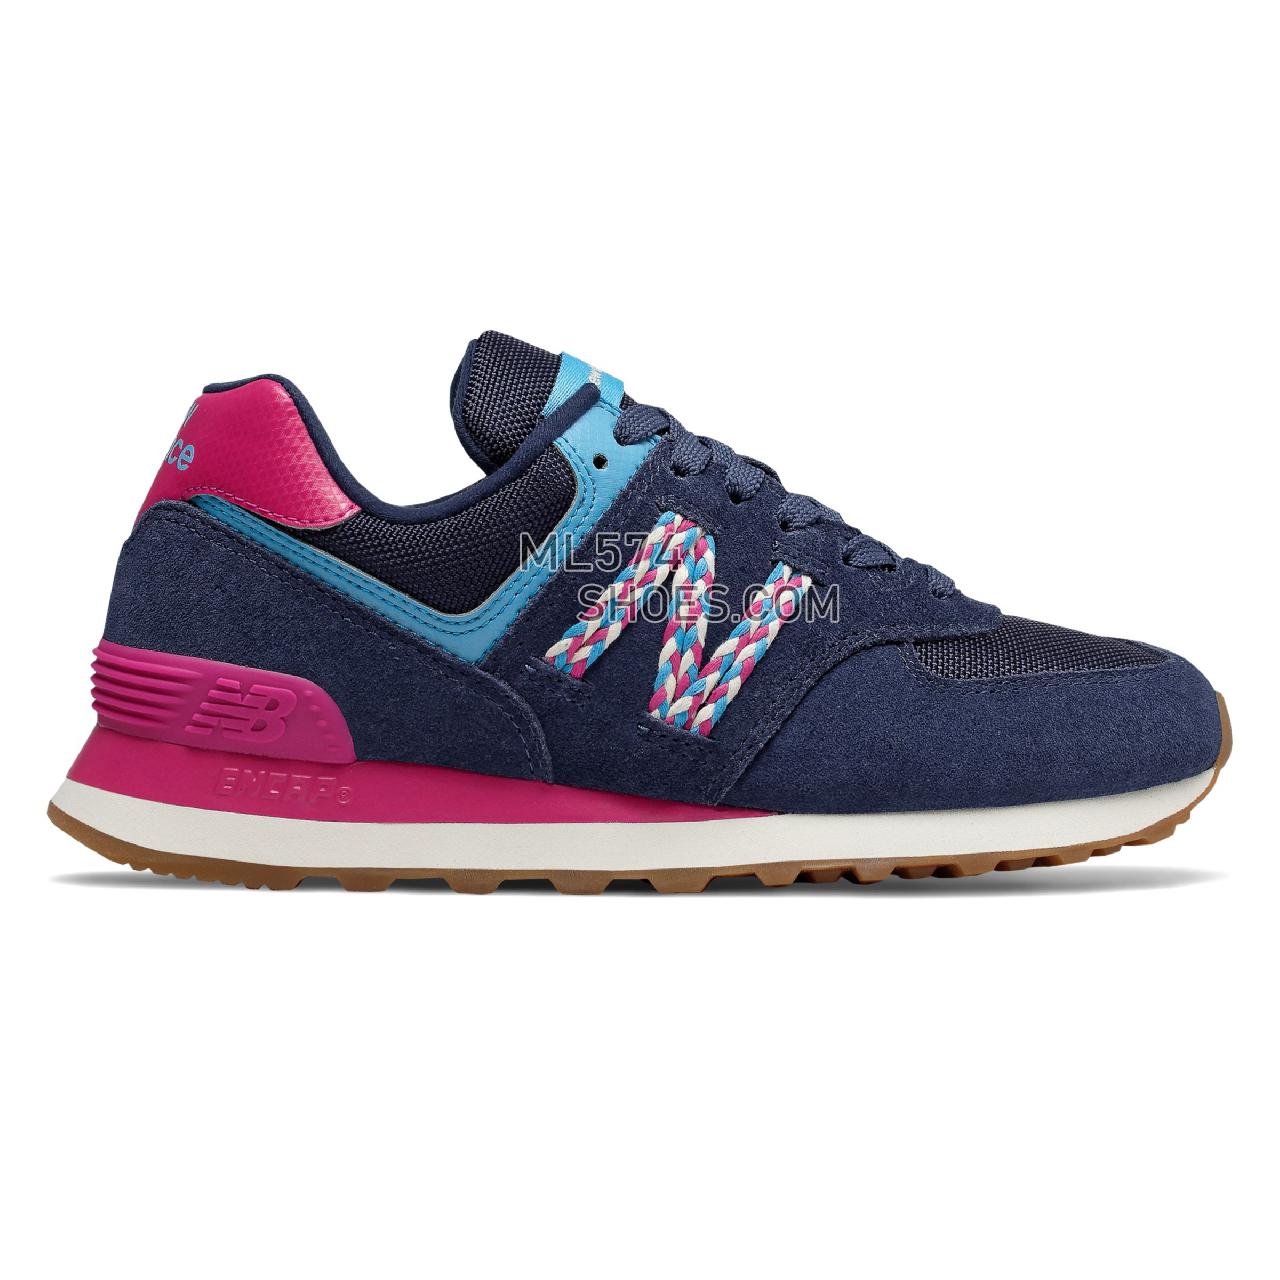 New Balance 574 - Women's Classic Sneakers - Techtonic Blue with Carnival and Cobalt Blue - WL574LDM